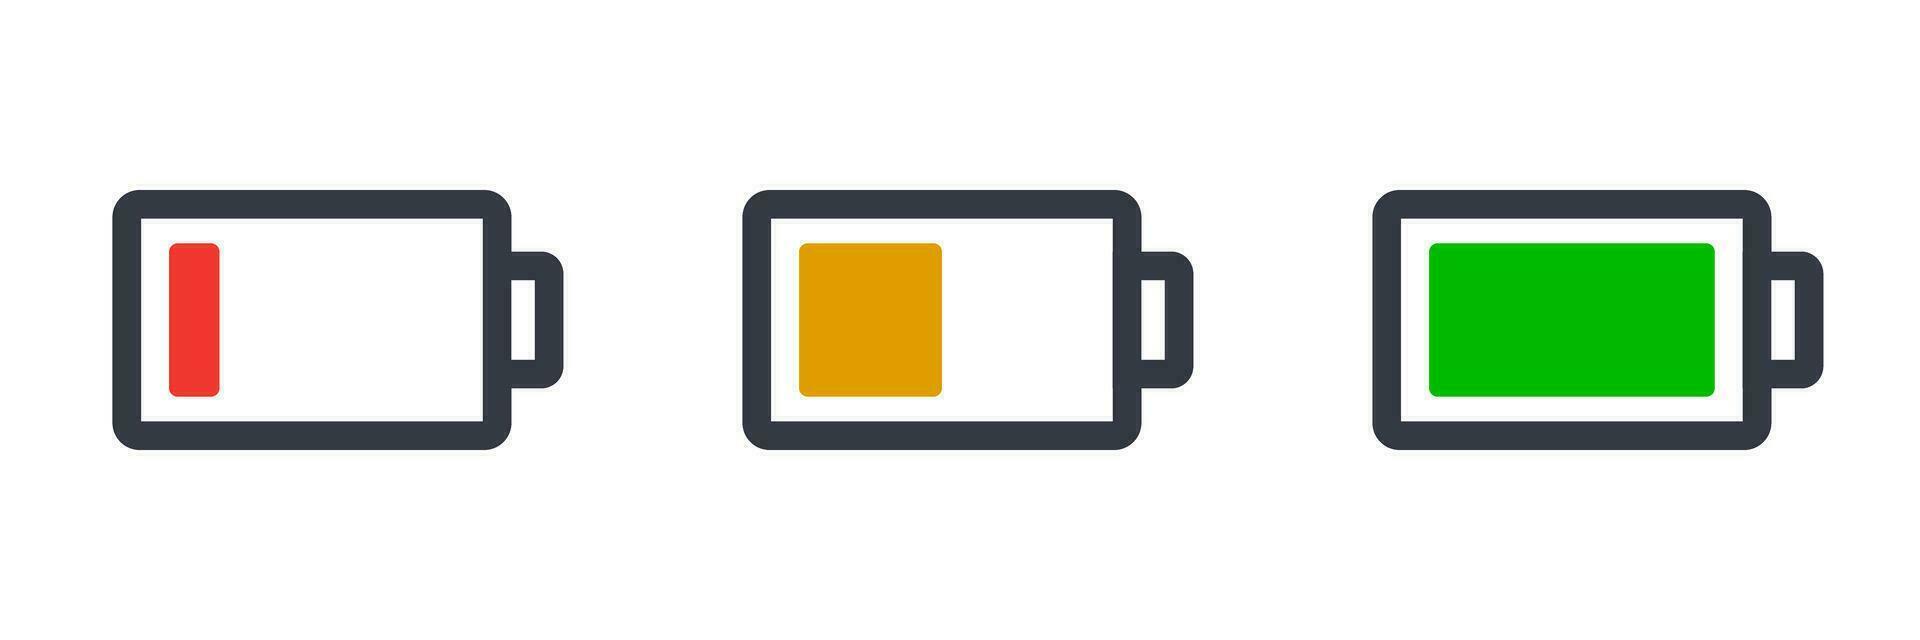 Battery icon set by remaining charge level. Vector. vector